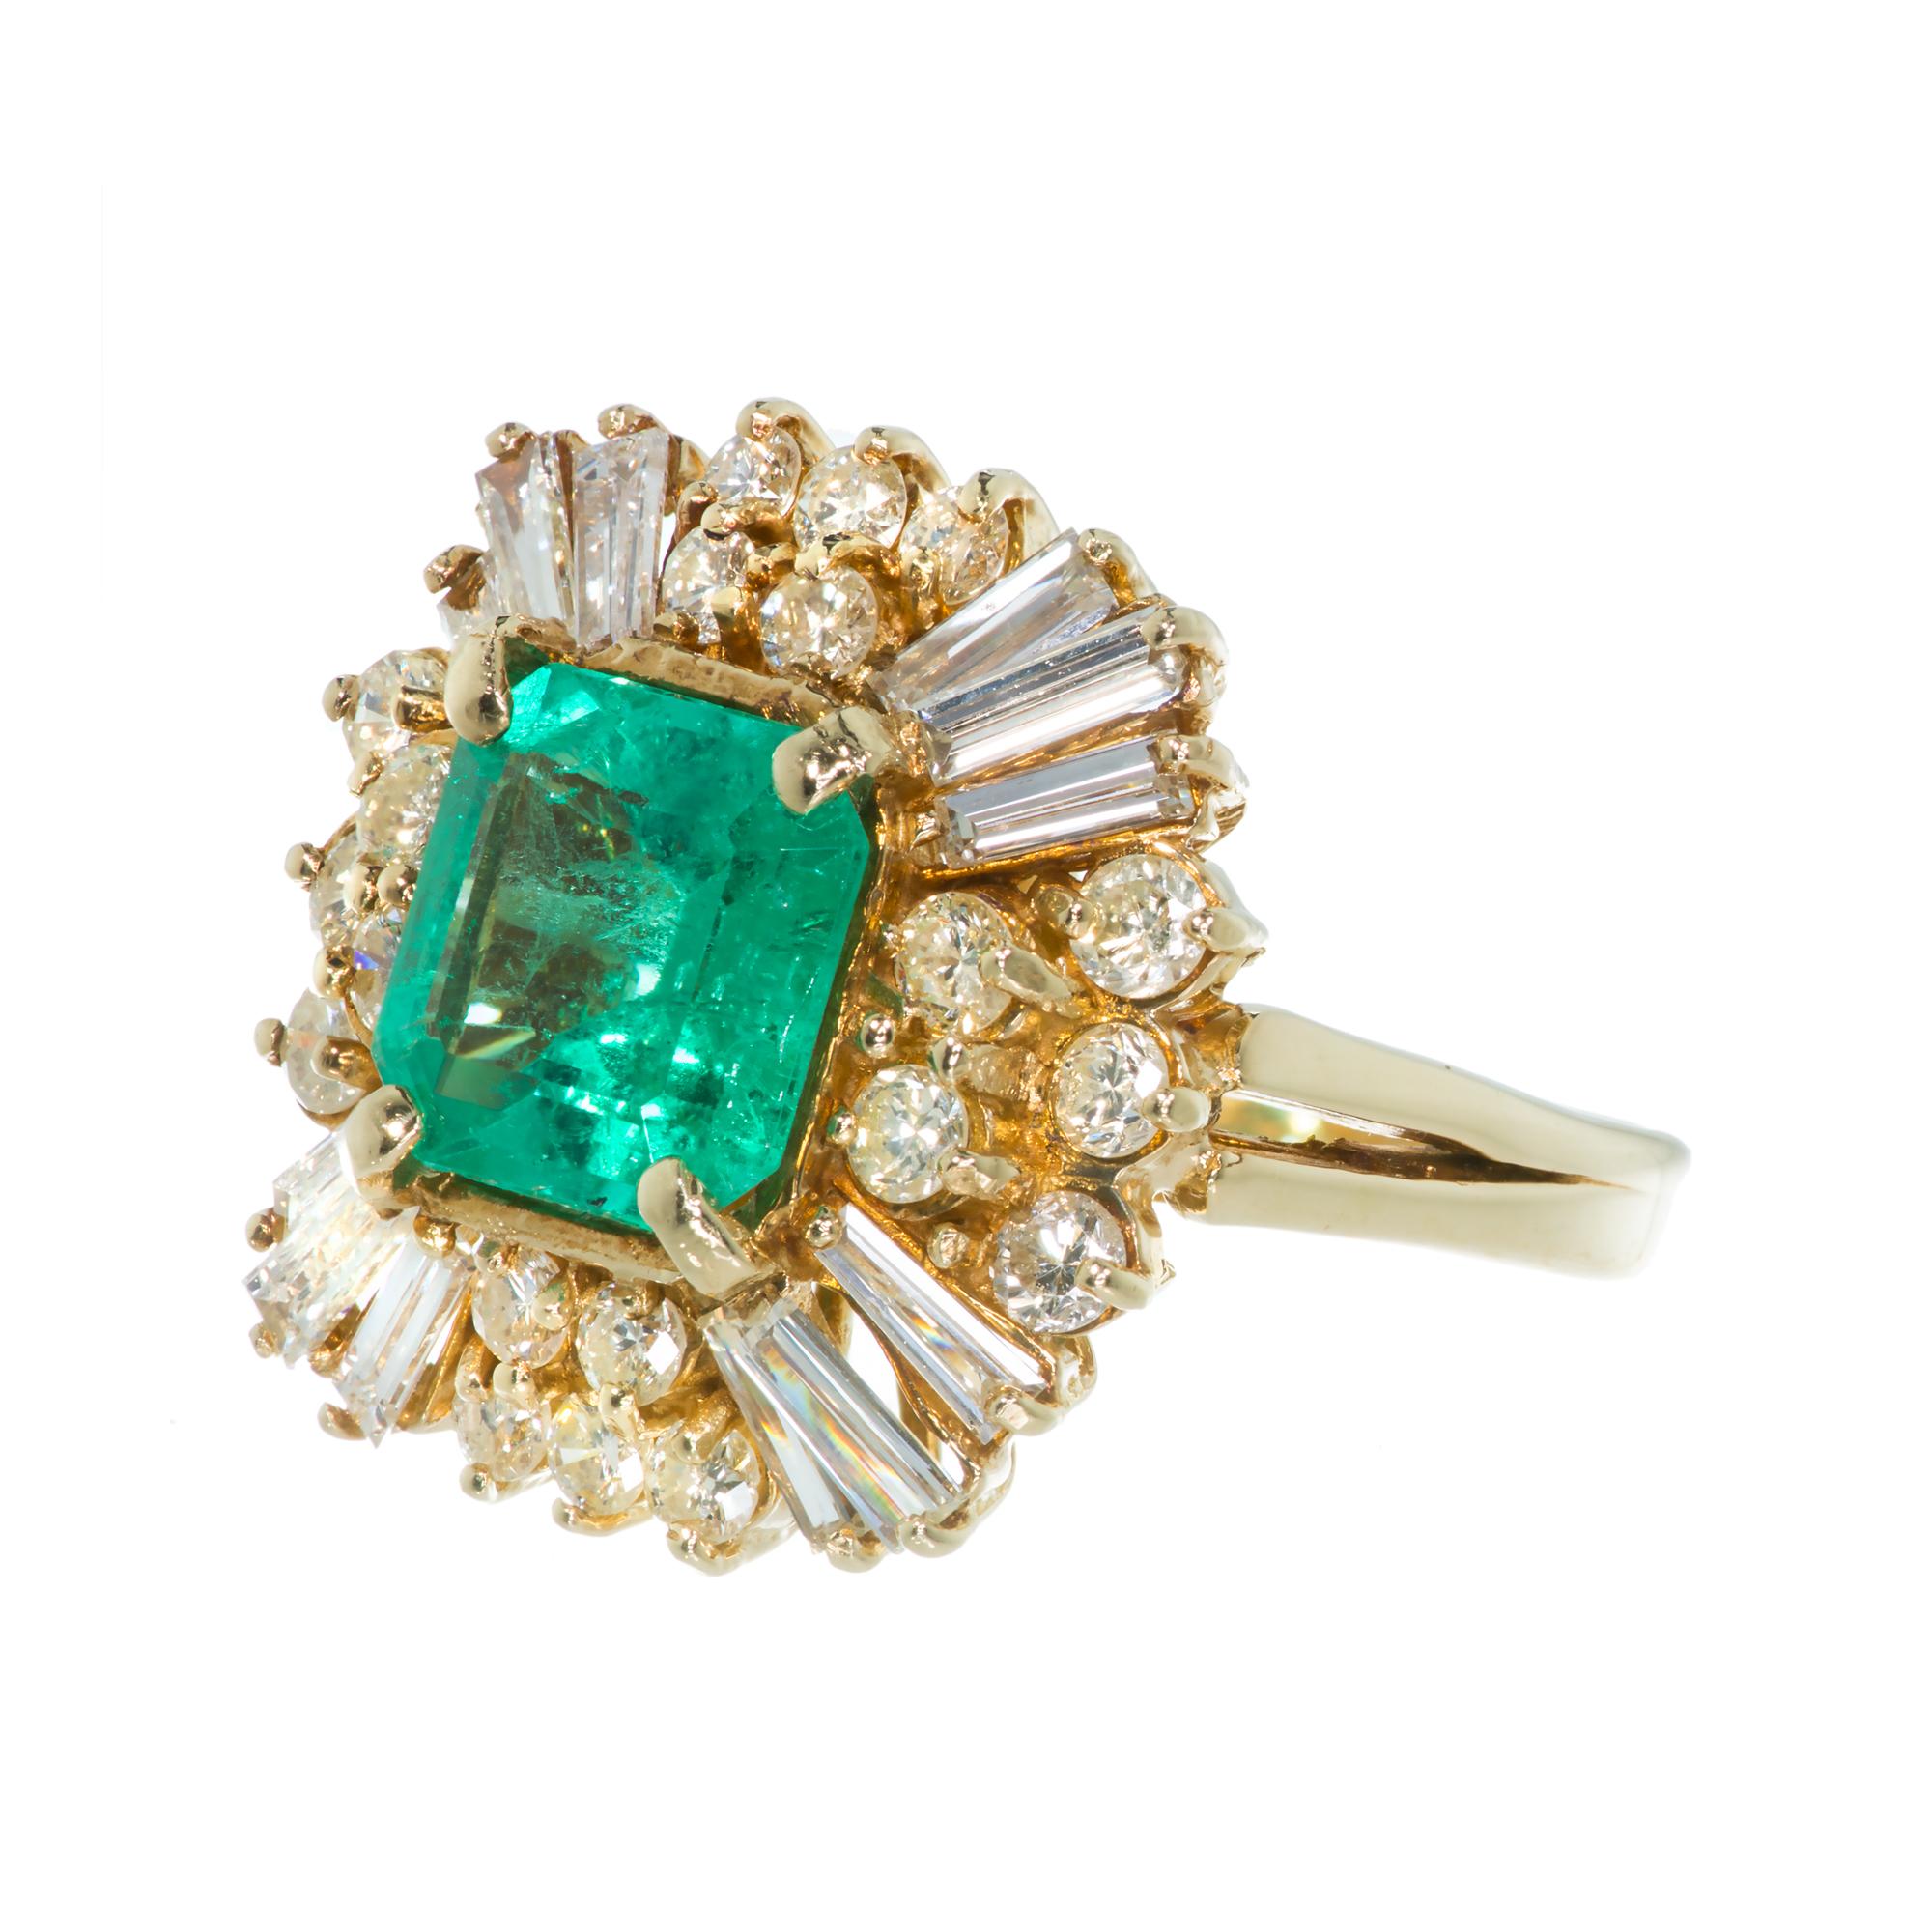 1960’s princess style emerald and diamond engagment ring. 4.00ct center emerald accented with tapered baguette and round diamonds in a handmade wire ring. Bright white sparkly white stones. The center is set with an Emerald with an unusually bright